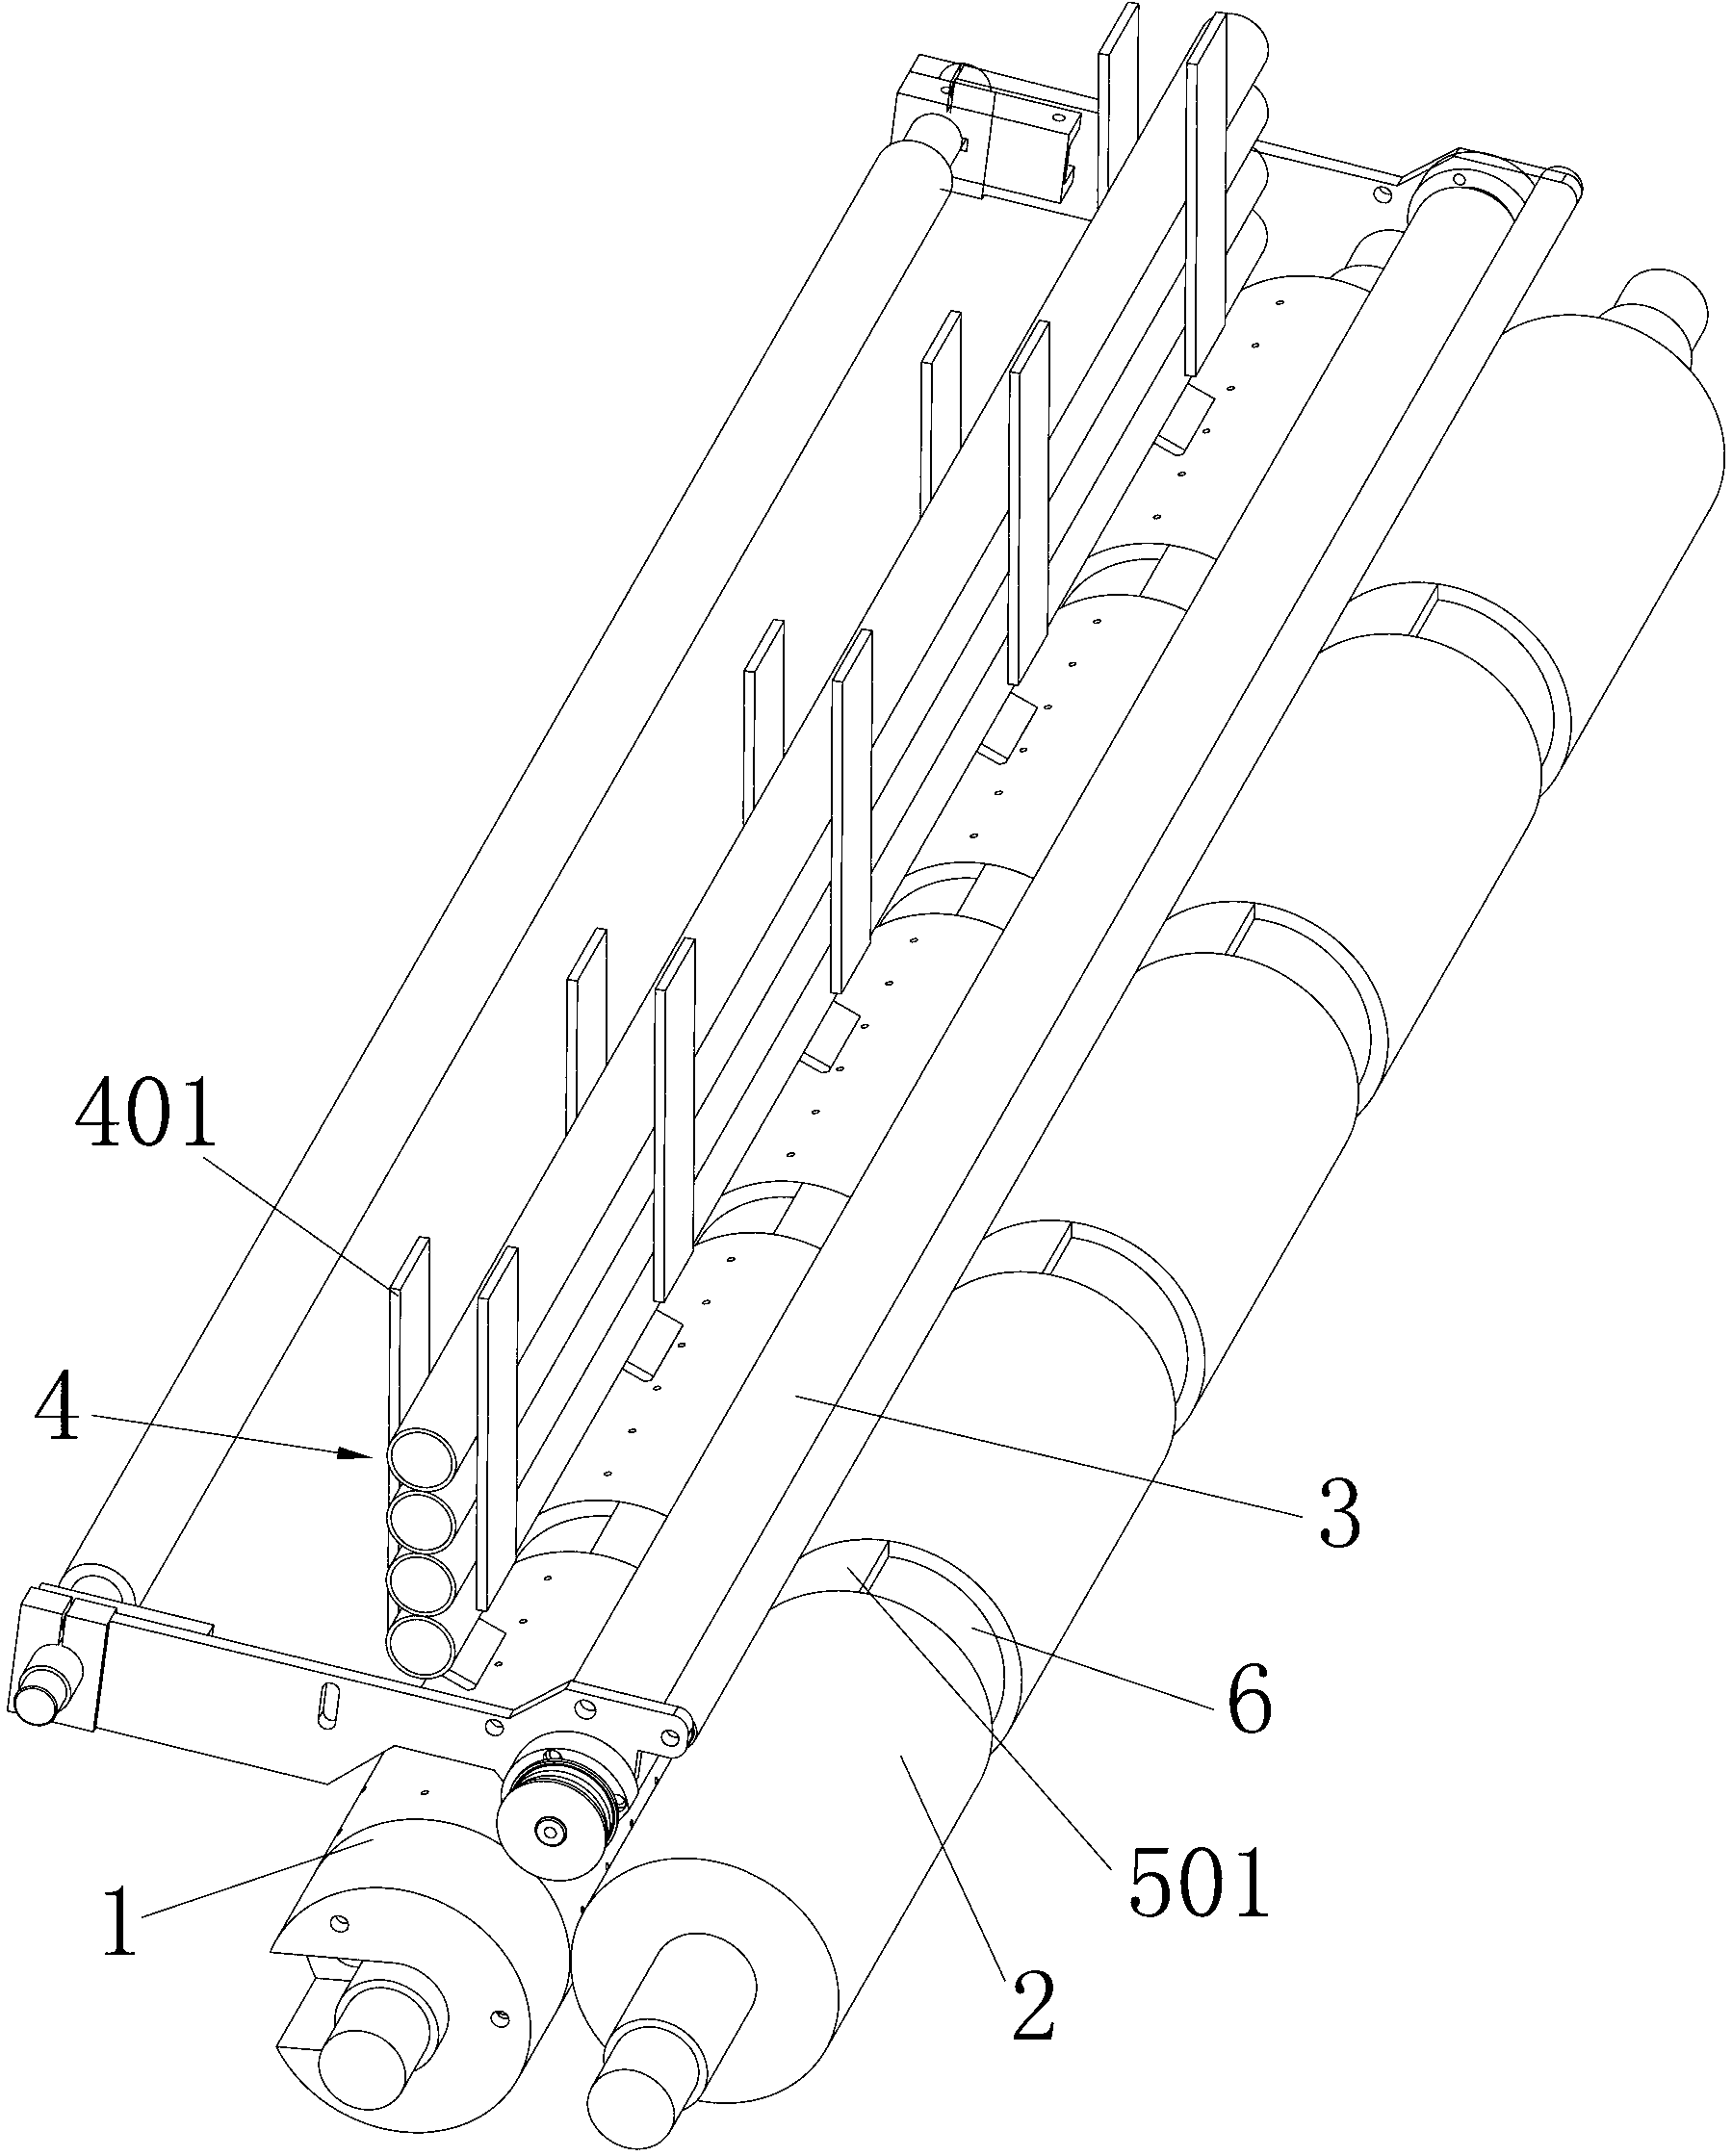 Full-automatic rewinding machine capable of continuously producing paper scroll with/without core without halt